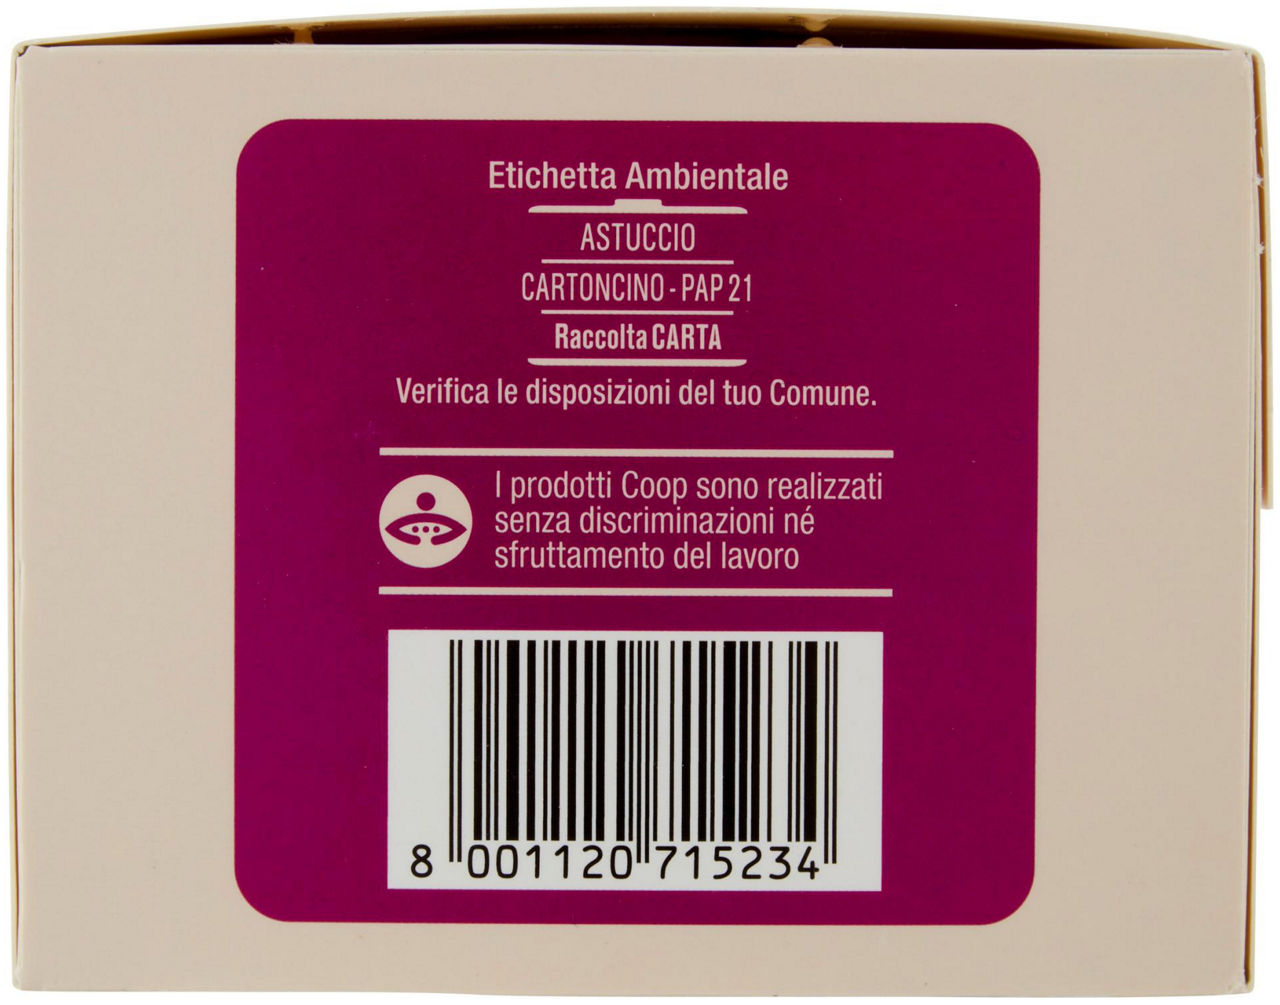 CAPSULE COMPATIBILI DOLCE GUSTO COOP MISCELA CAFFE' E GINSENG PZ 16X6,8 G G108,8 - 5